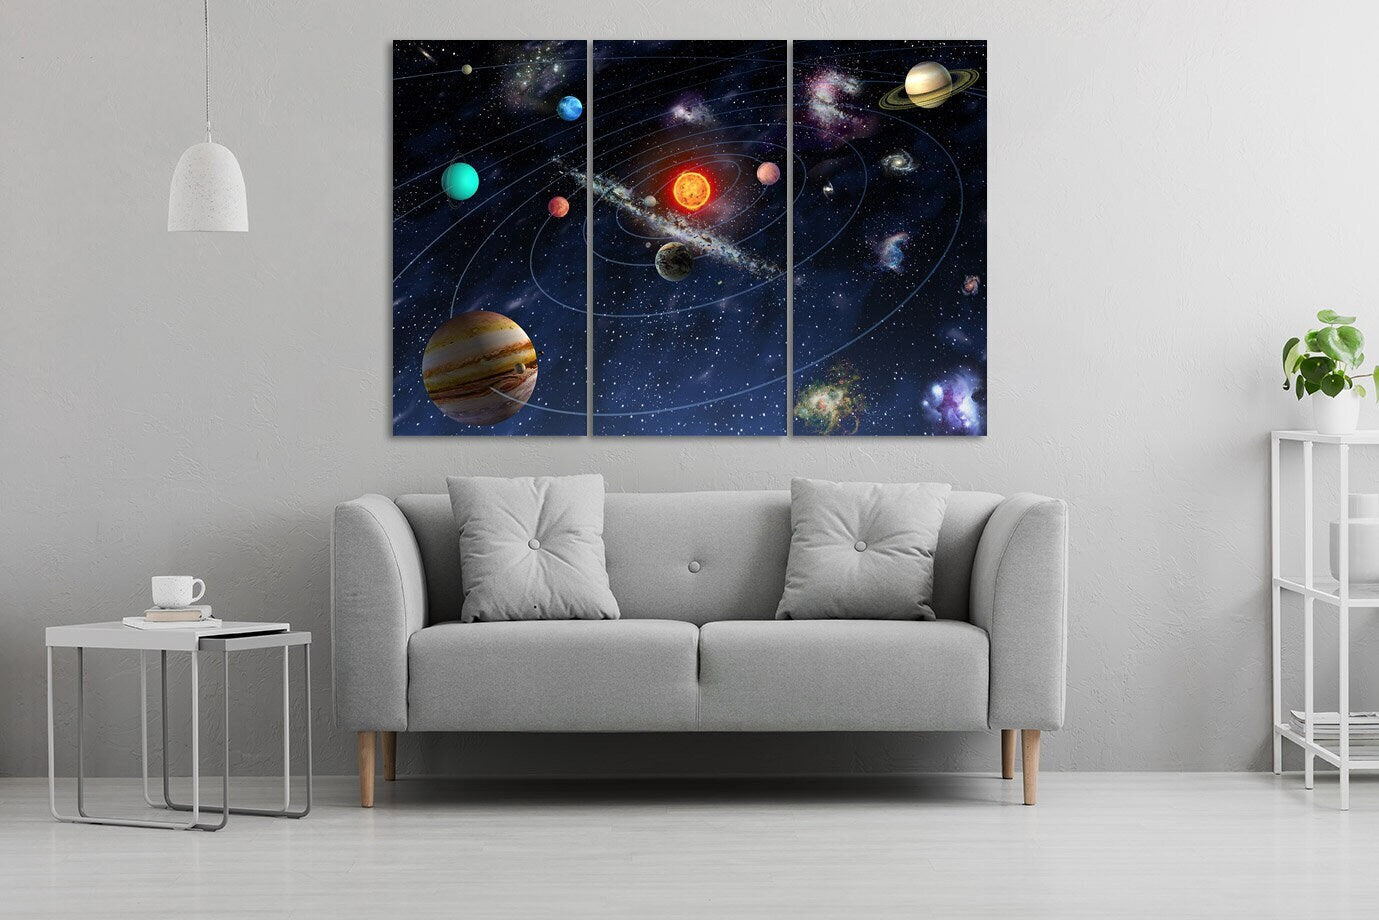 Space home wall canvas painting Planets posters Сosmos multi panel wall art paintings on canvas outer bedroom wall decor fantasy art